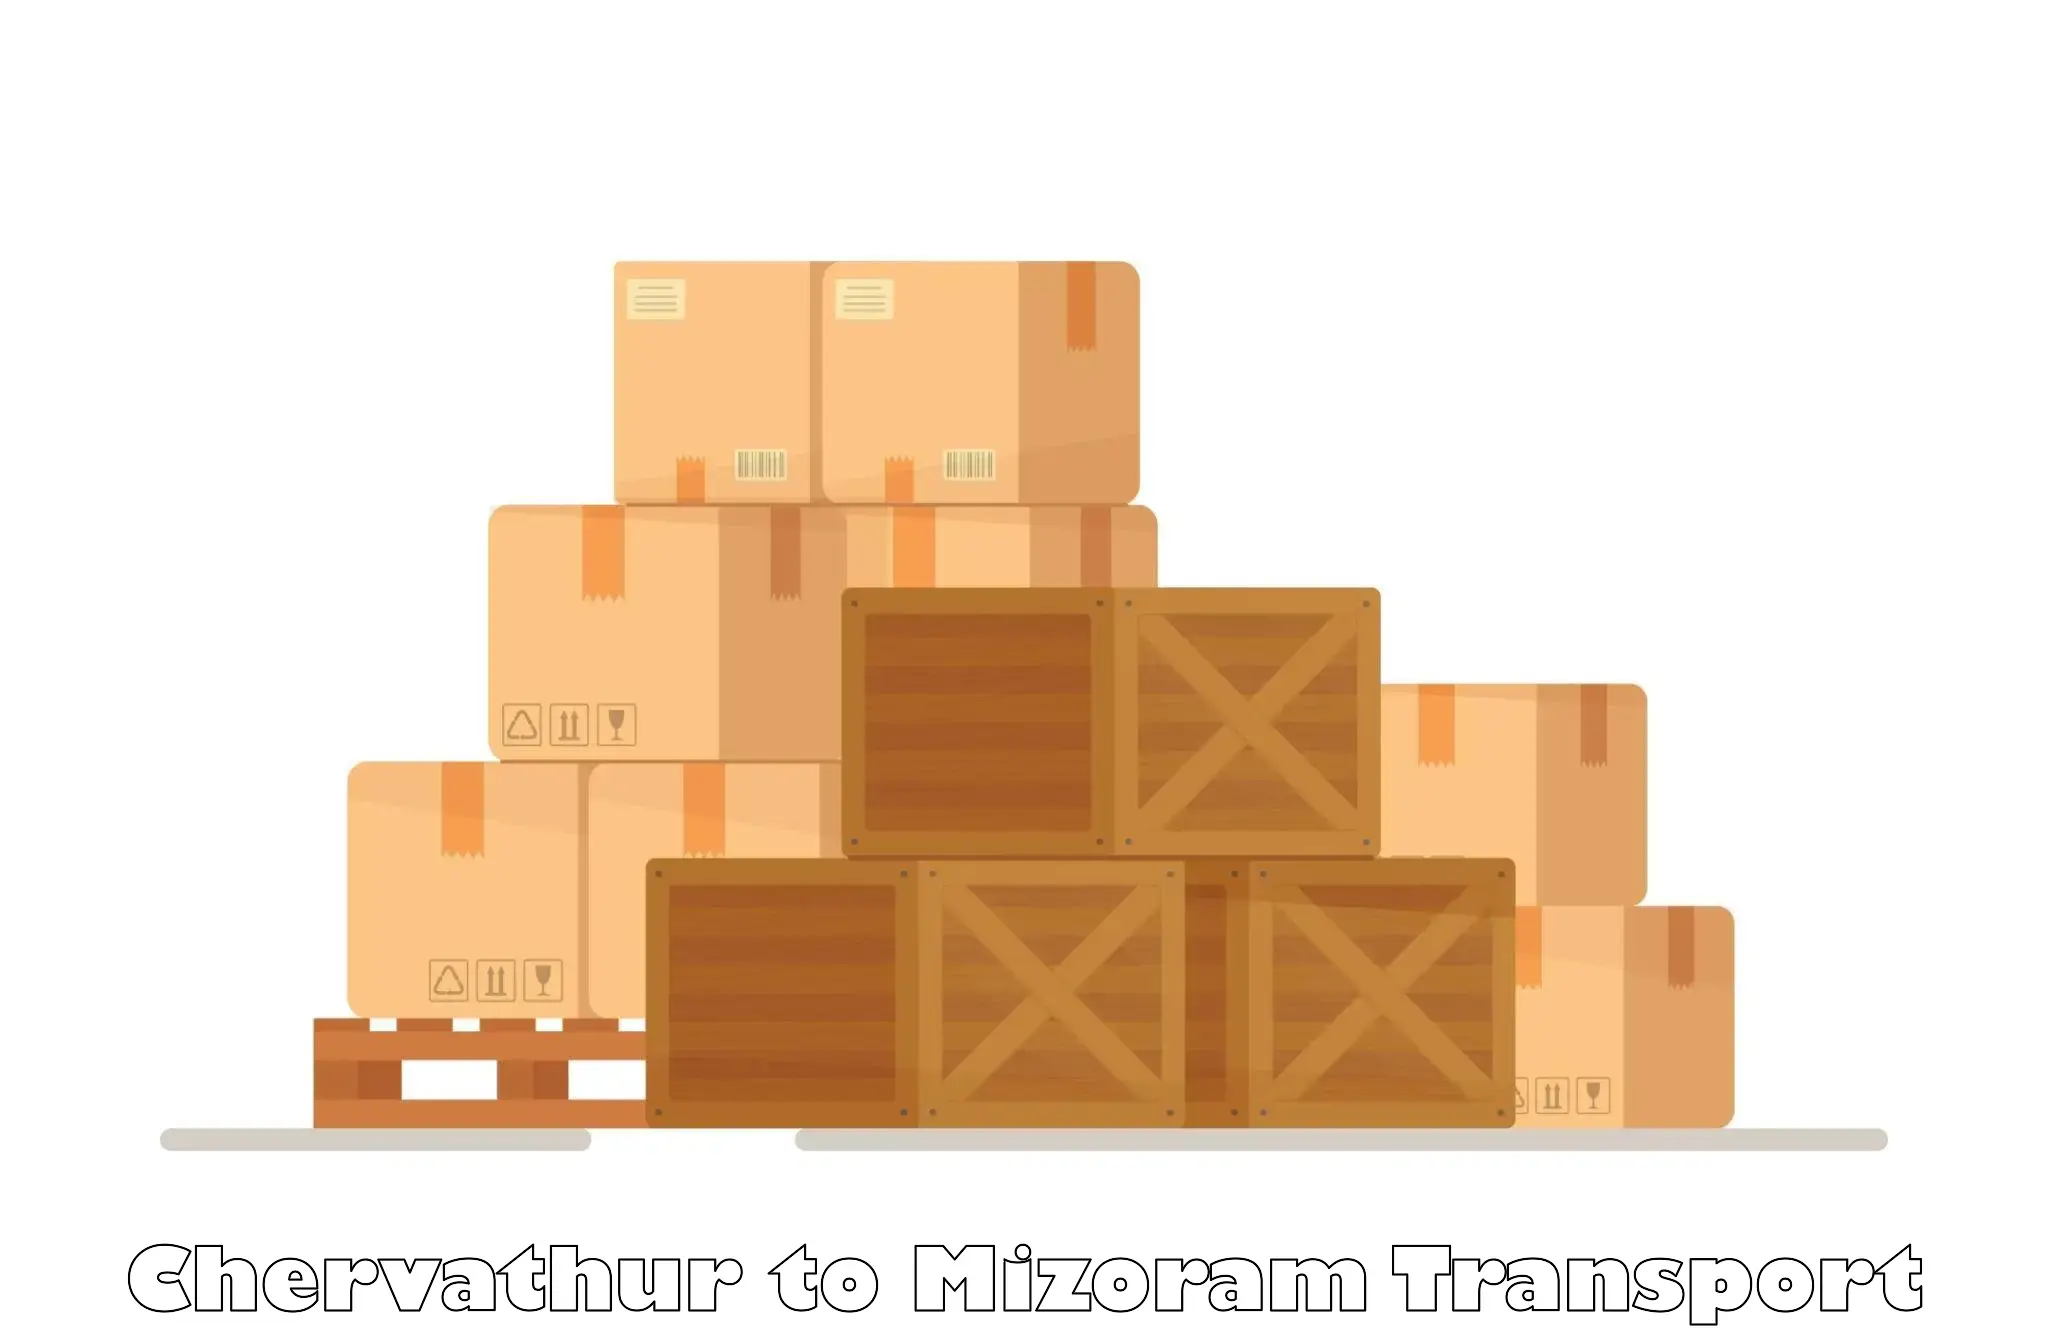 Daily parcel service transport Chervathur to Siaha